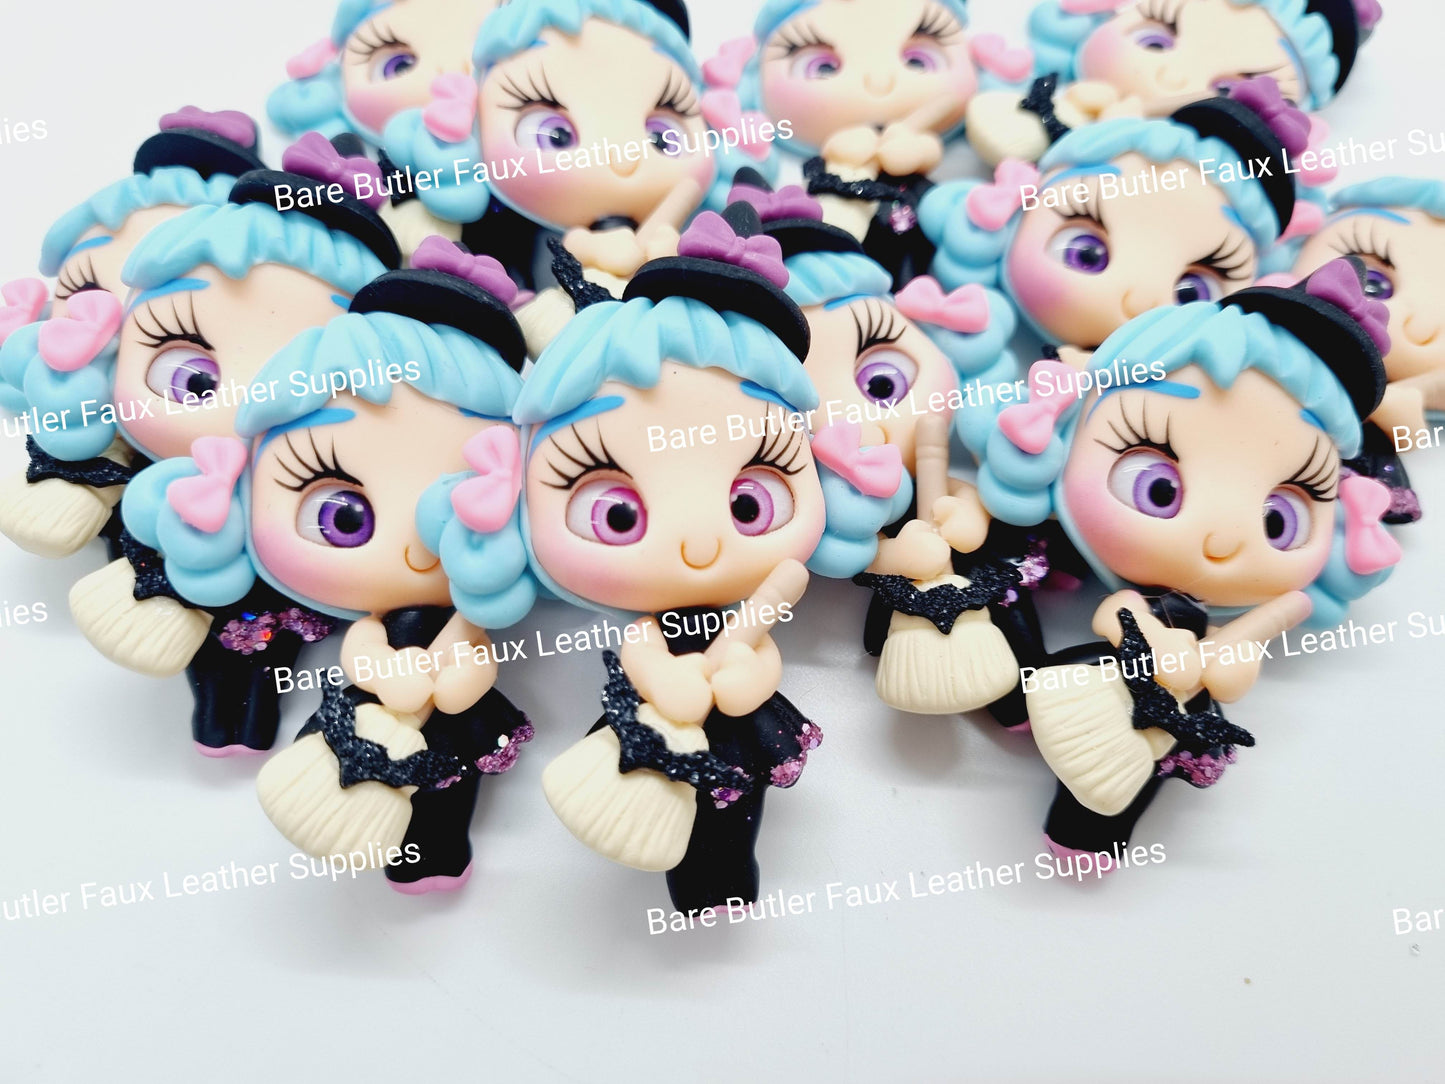 Cute Witch Blue Hair - Bare Butler Faux Leather Supplies 